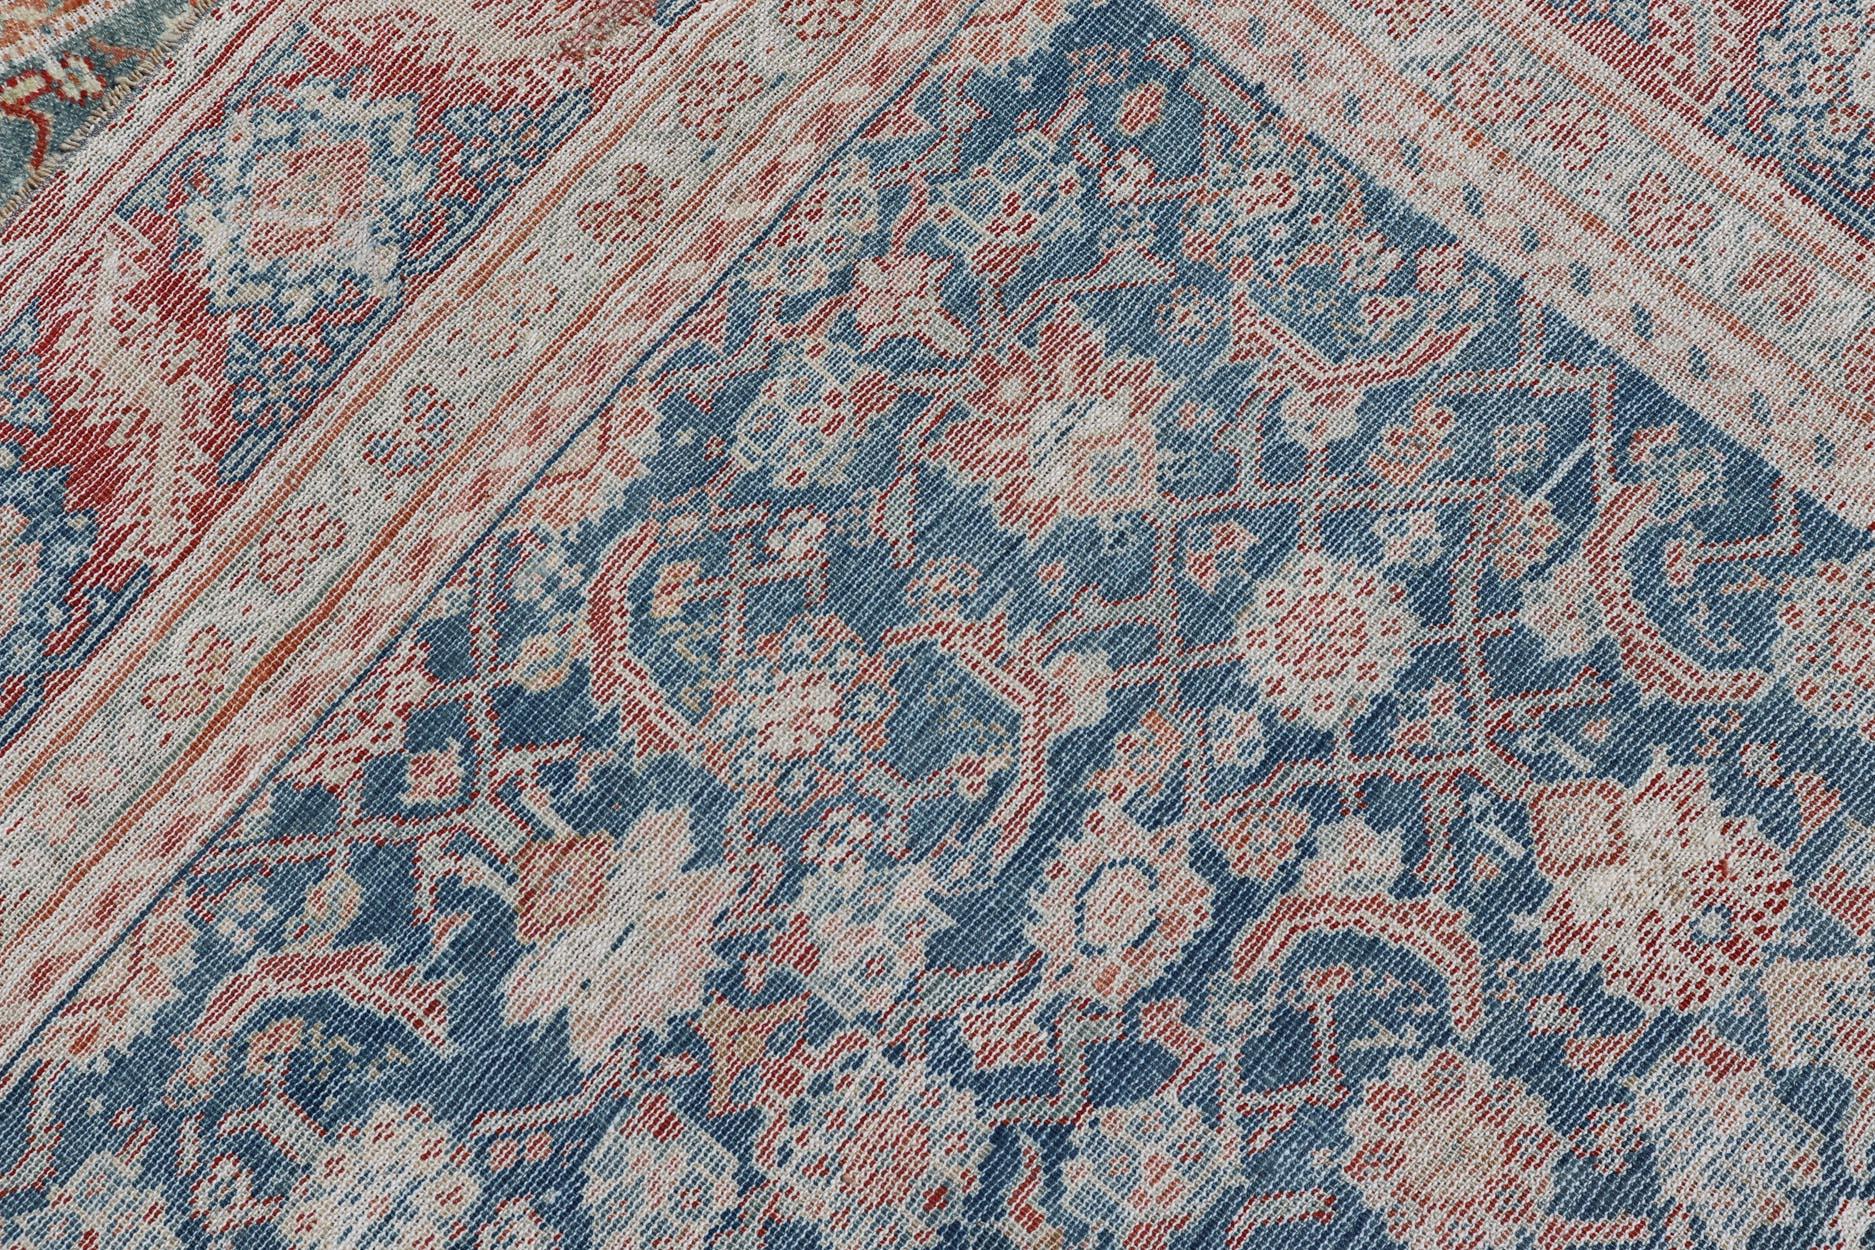 Antique Persian Malayer Gallery Rug with All over Design in Blue's and Red For Sale 7